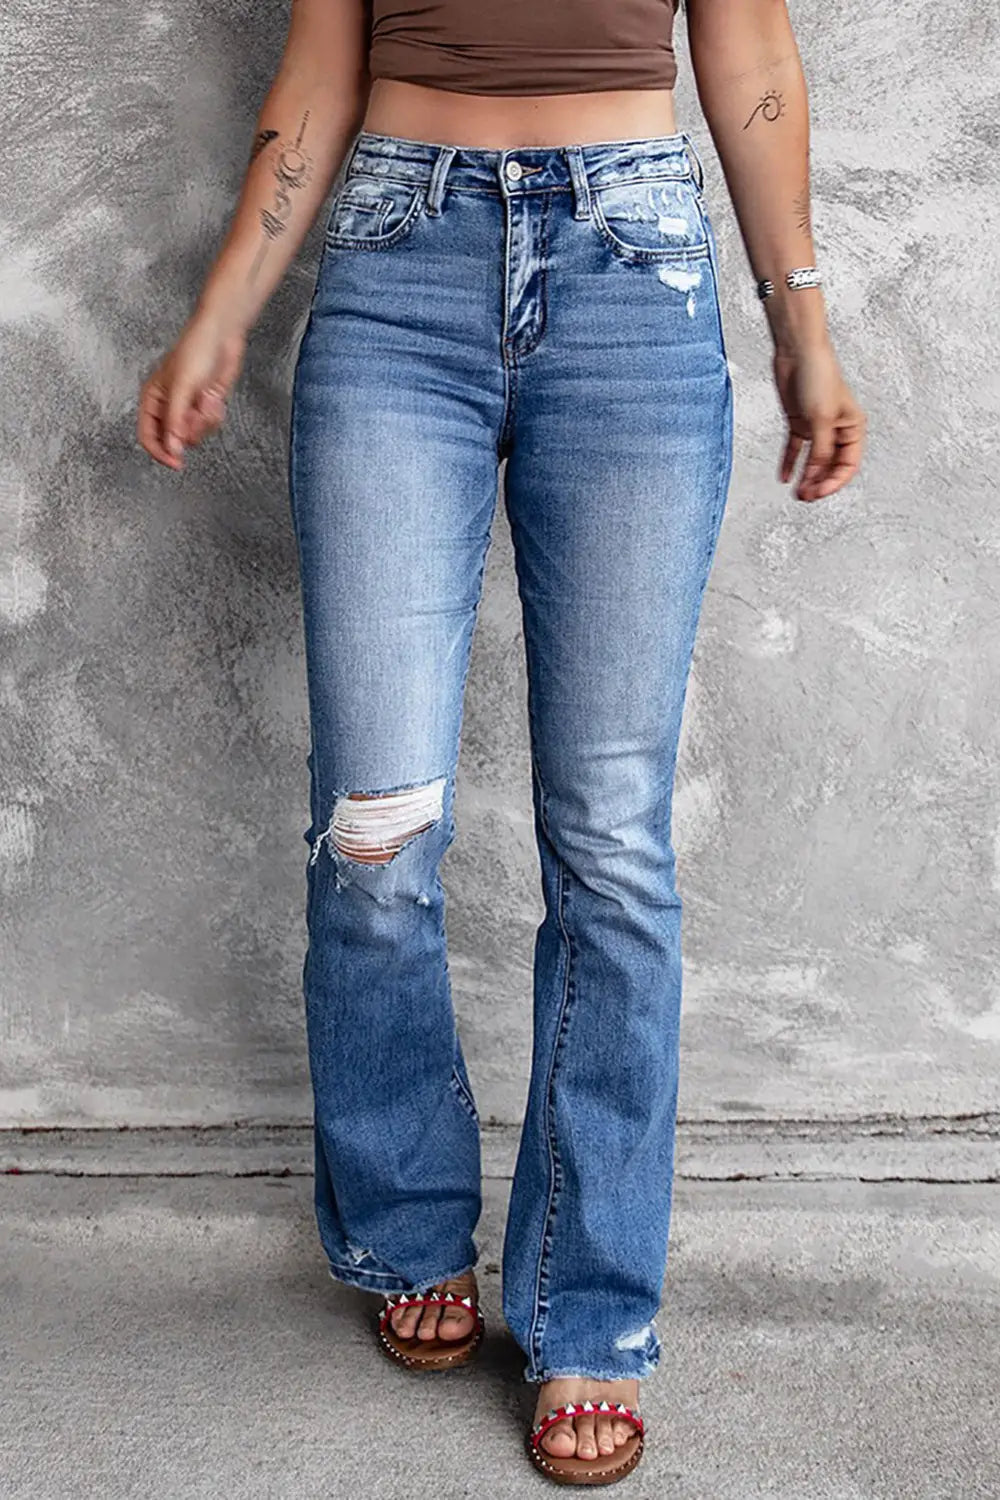 Blue distressed flare jeans - s / 70% cotton + 28% polyester + 2% elastane